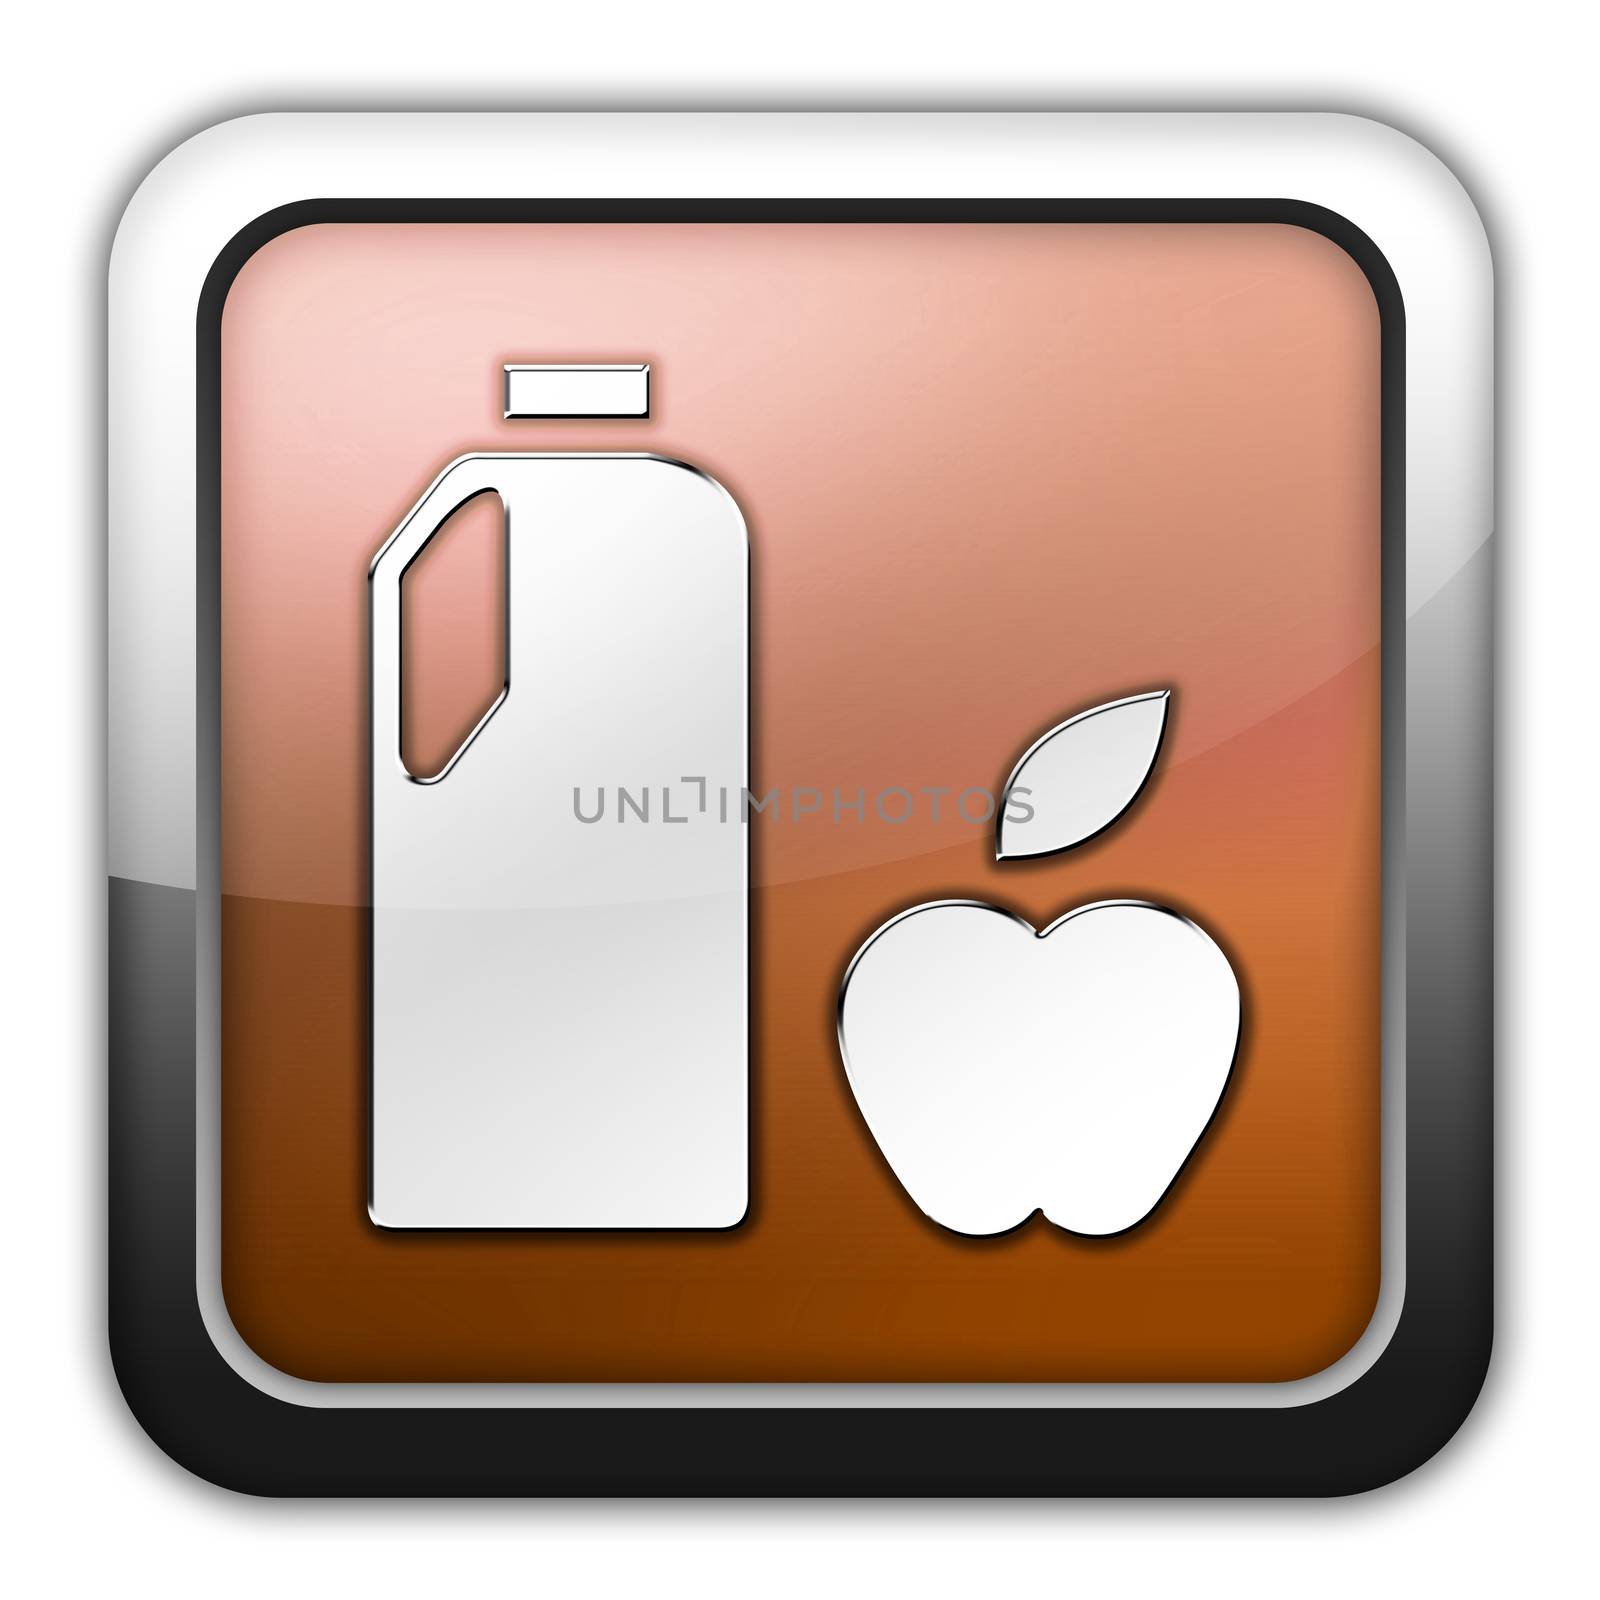 Icon, Button, Pictogram with Groceries symbol